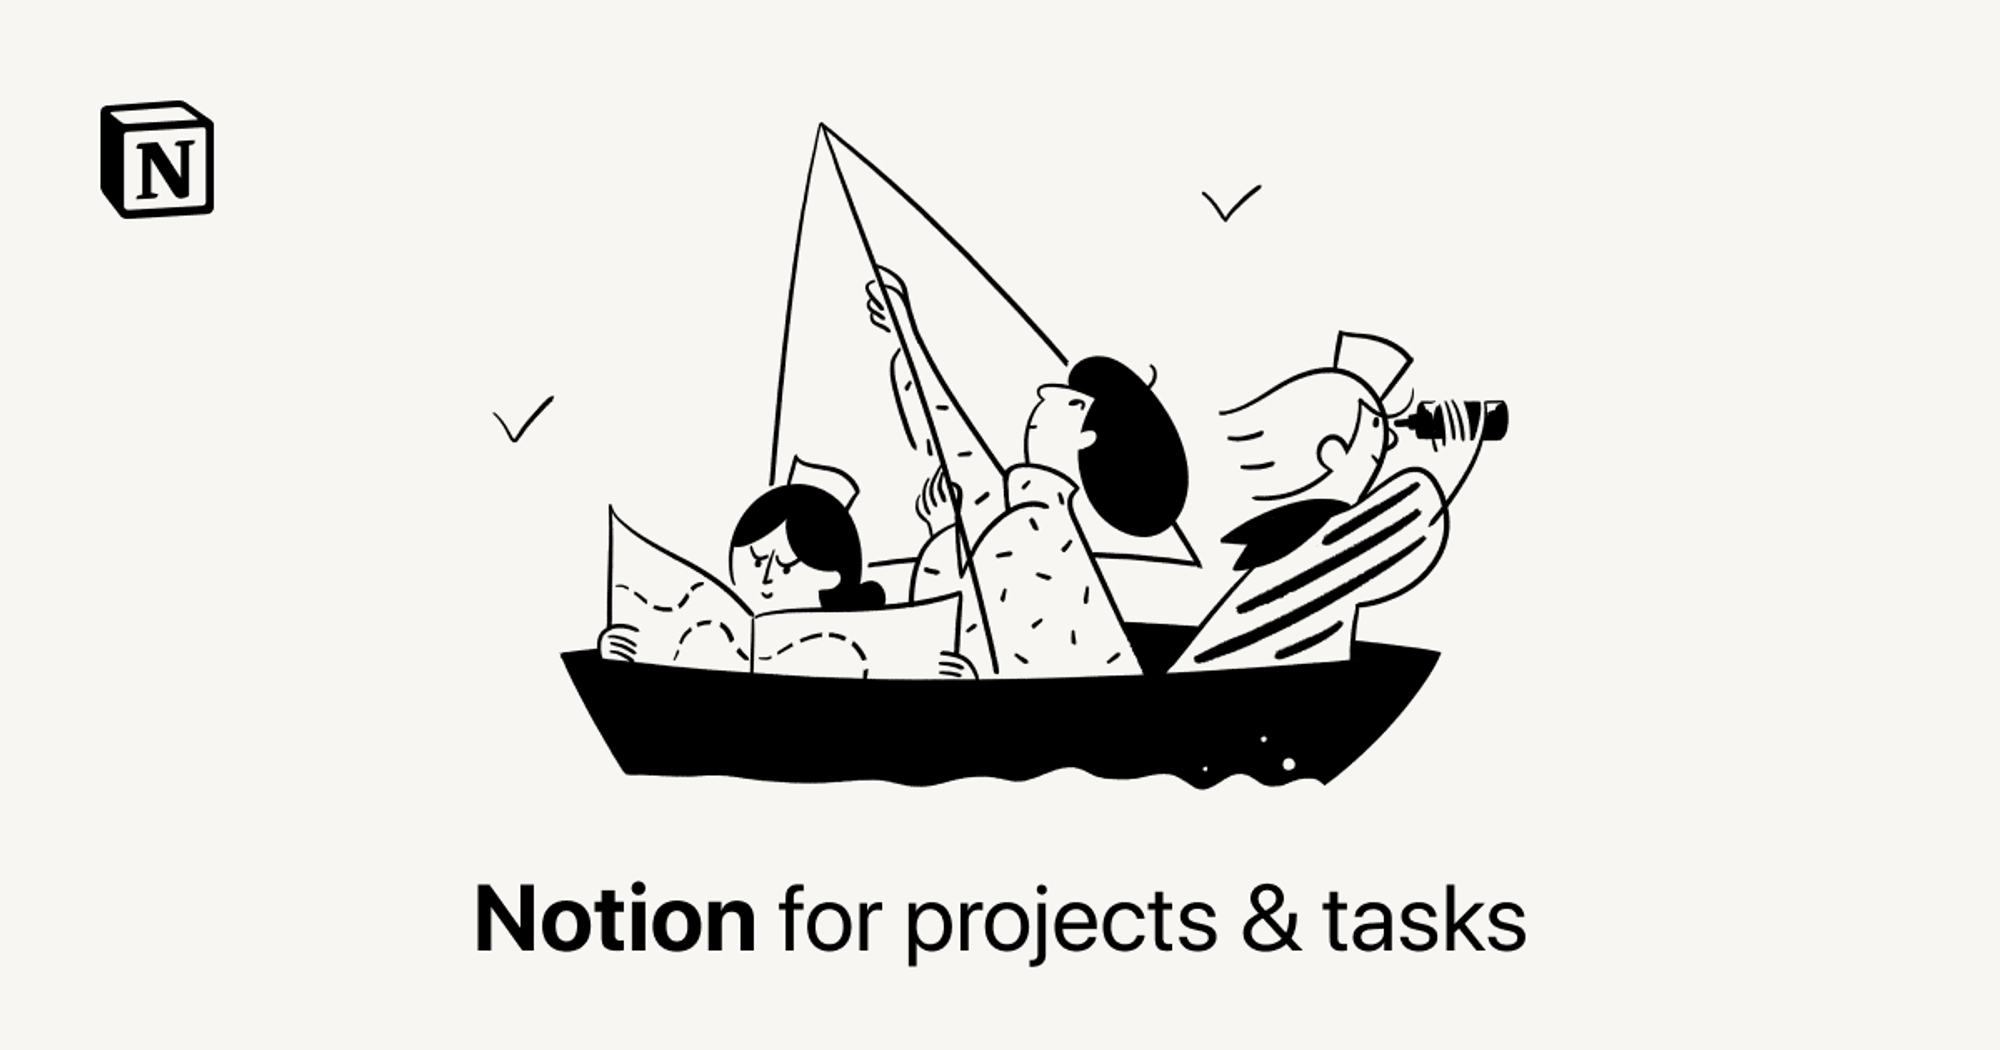 Notion for projects & tasks